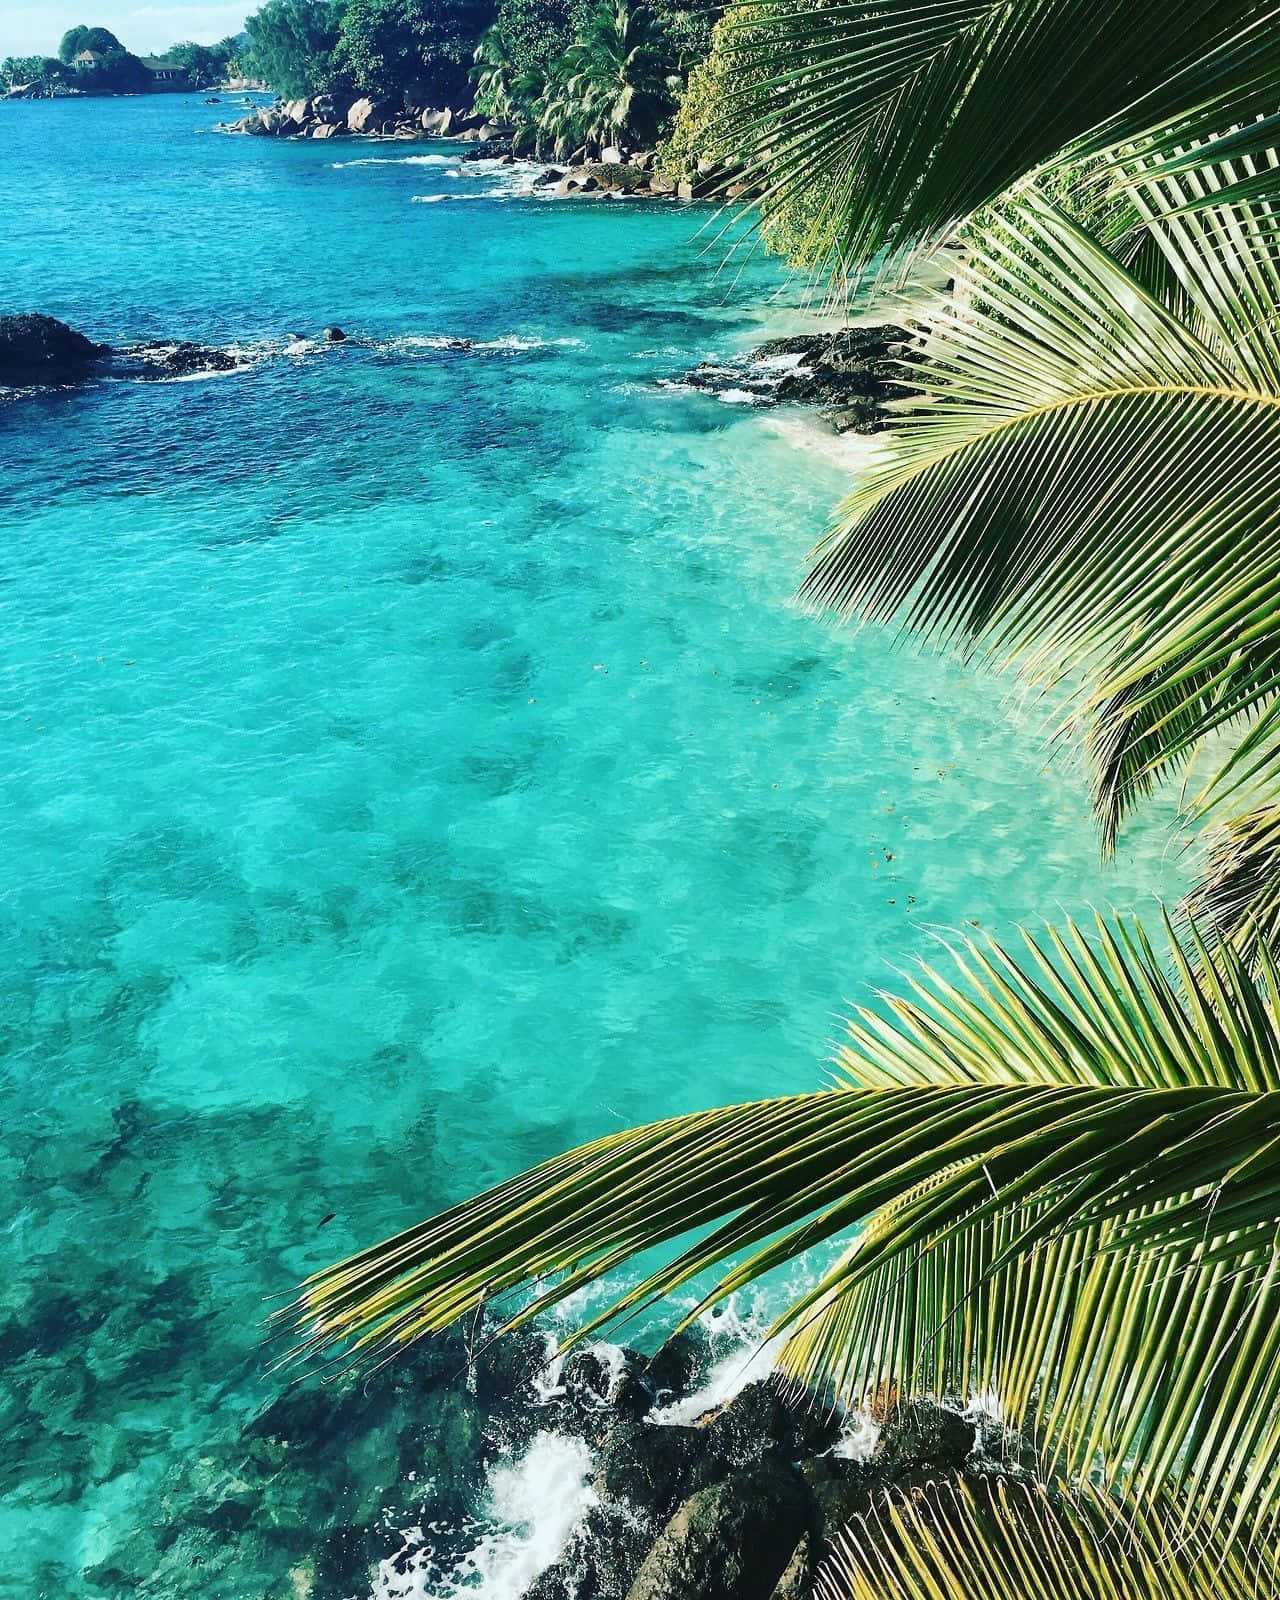 Get lost in the beauty of the tropical island! Wallpaper